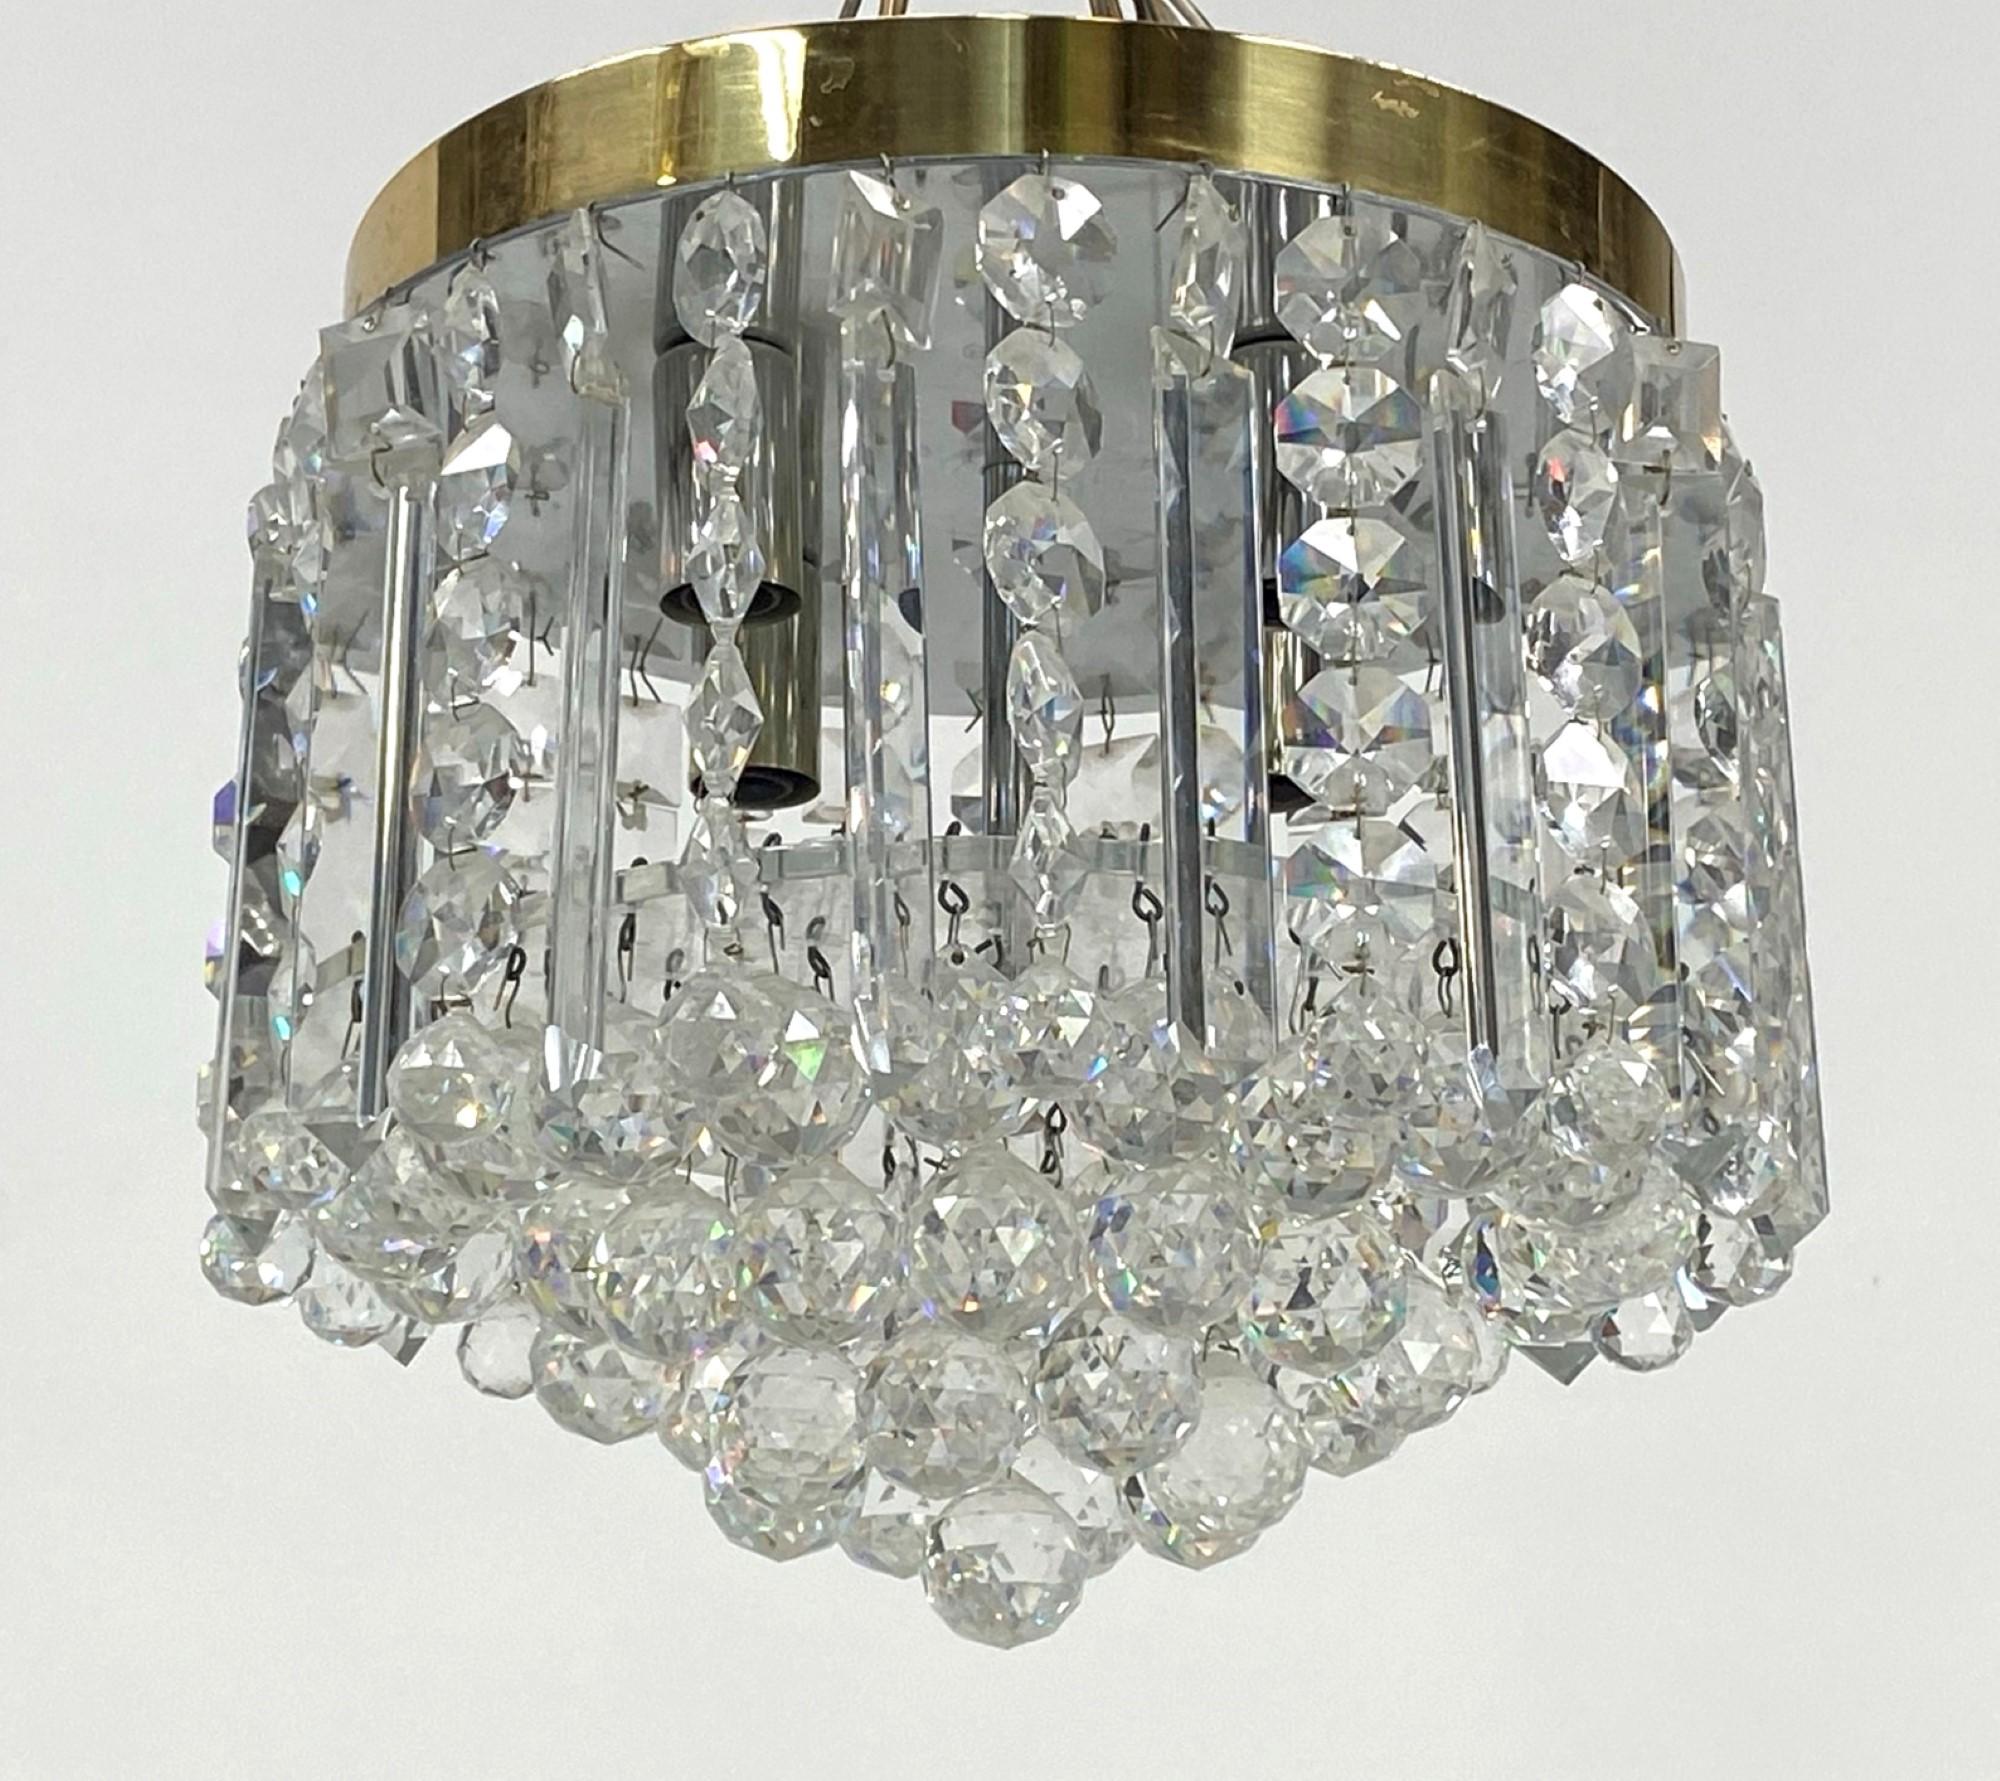 Mid-Century Modern flush mount crystal chandelier with polished brass ceiling mounted lighting pan. These were part of the original décor of a mansion in Beverly Hills. Features long crystals and a faceted ball crystal. Priced each. This can be seen